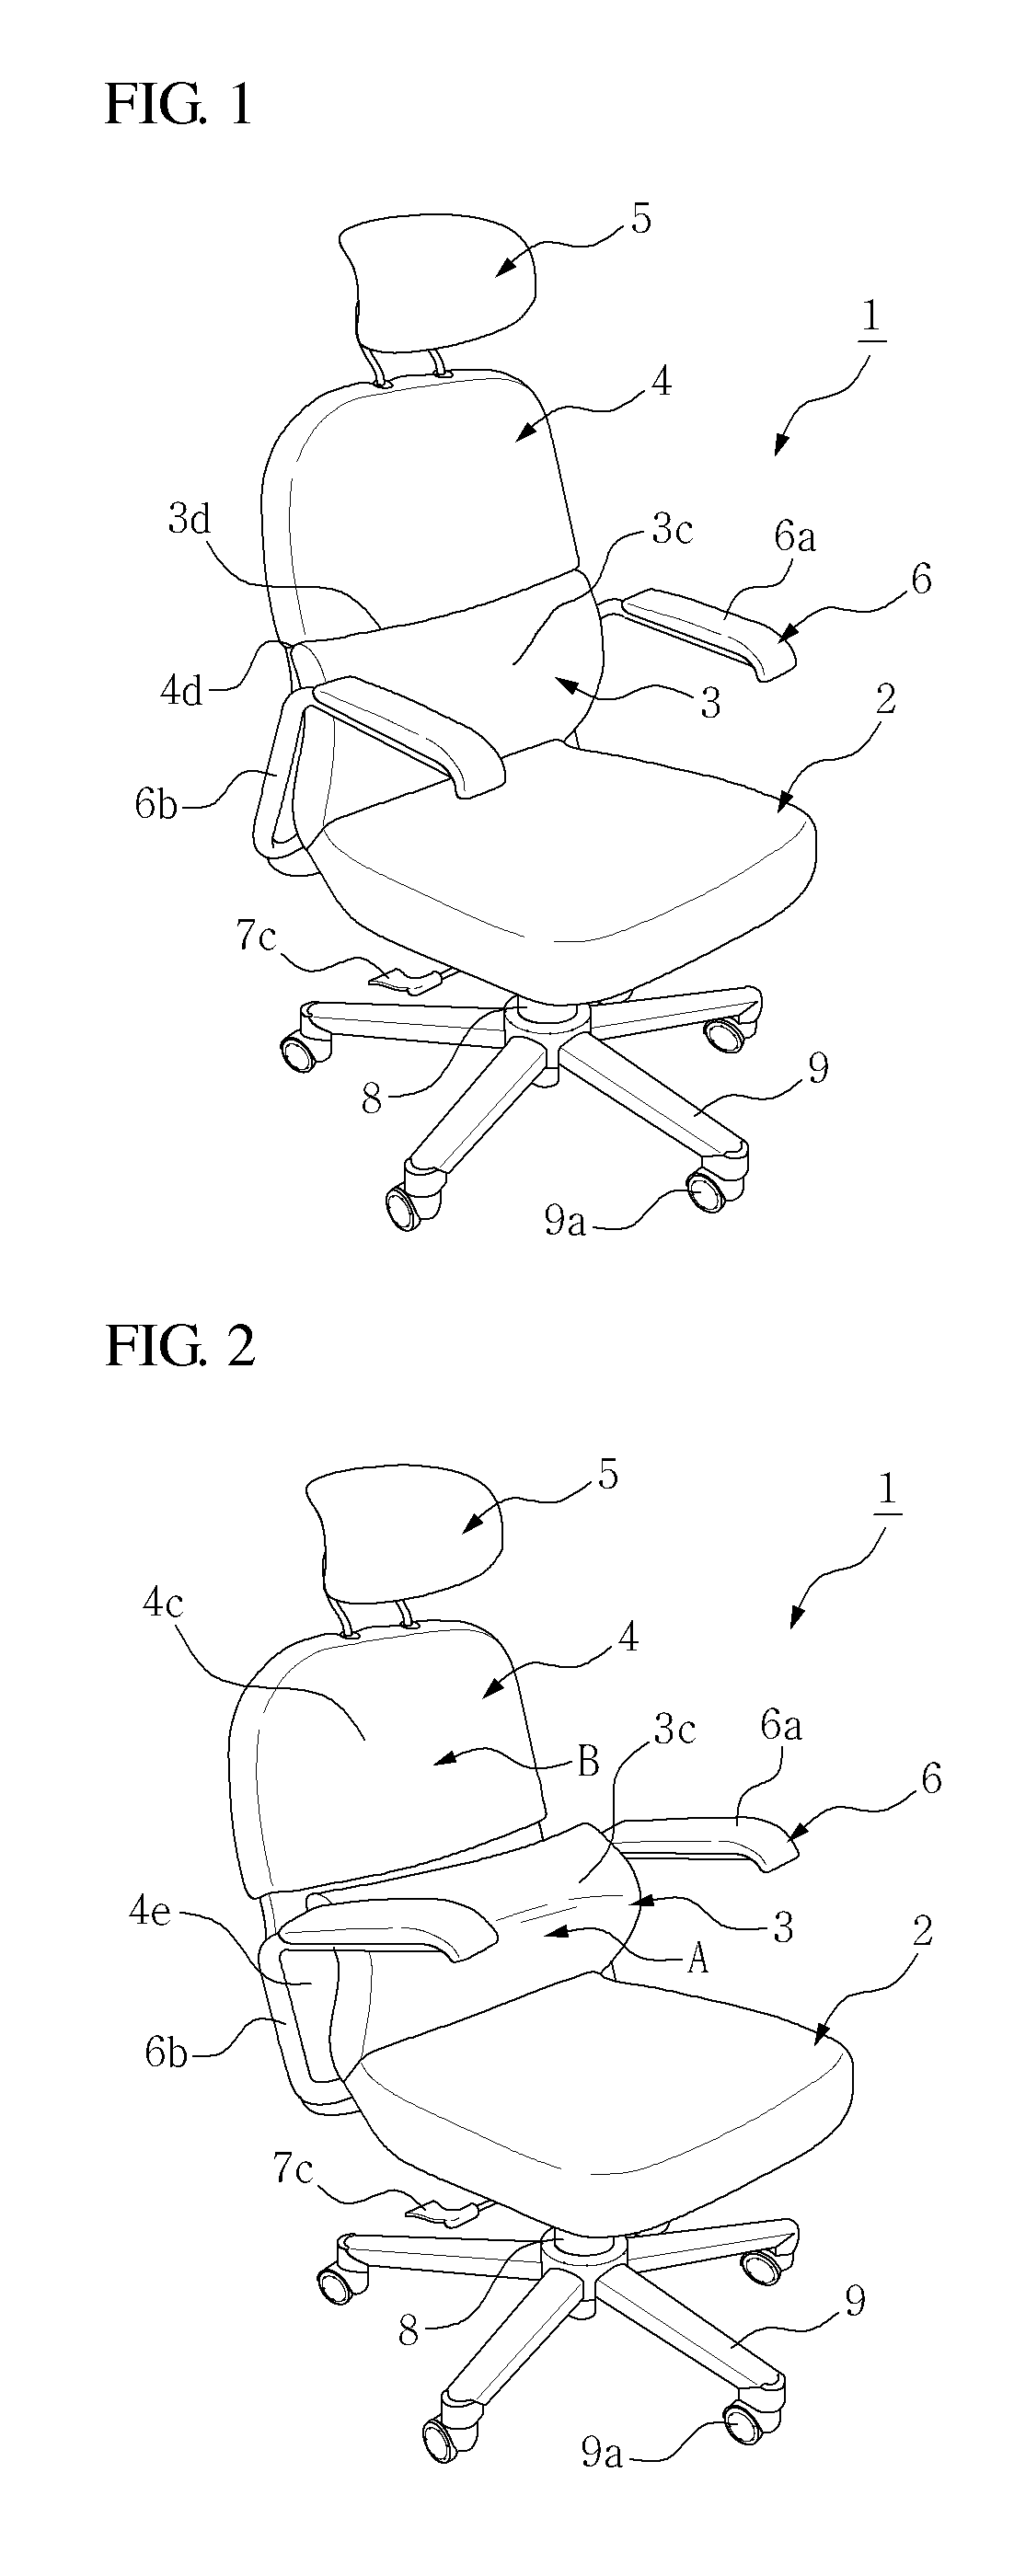 Chair with separate and interconnecting type lumbar and thoracic supports